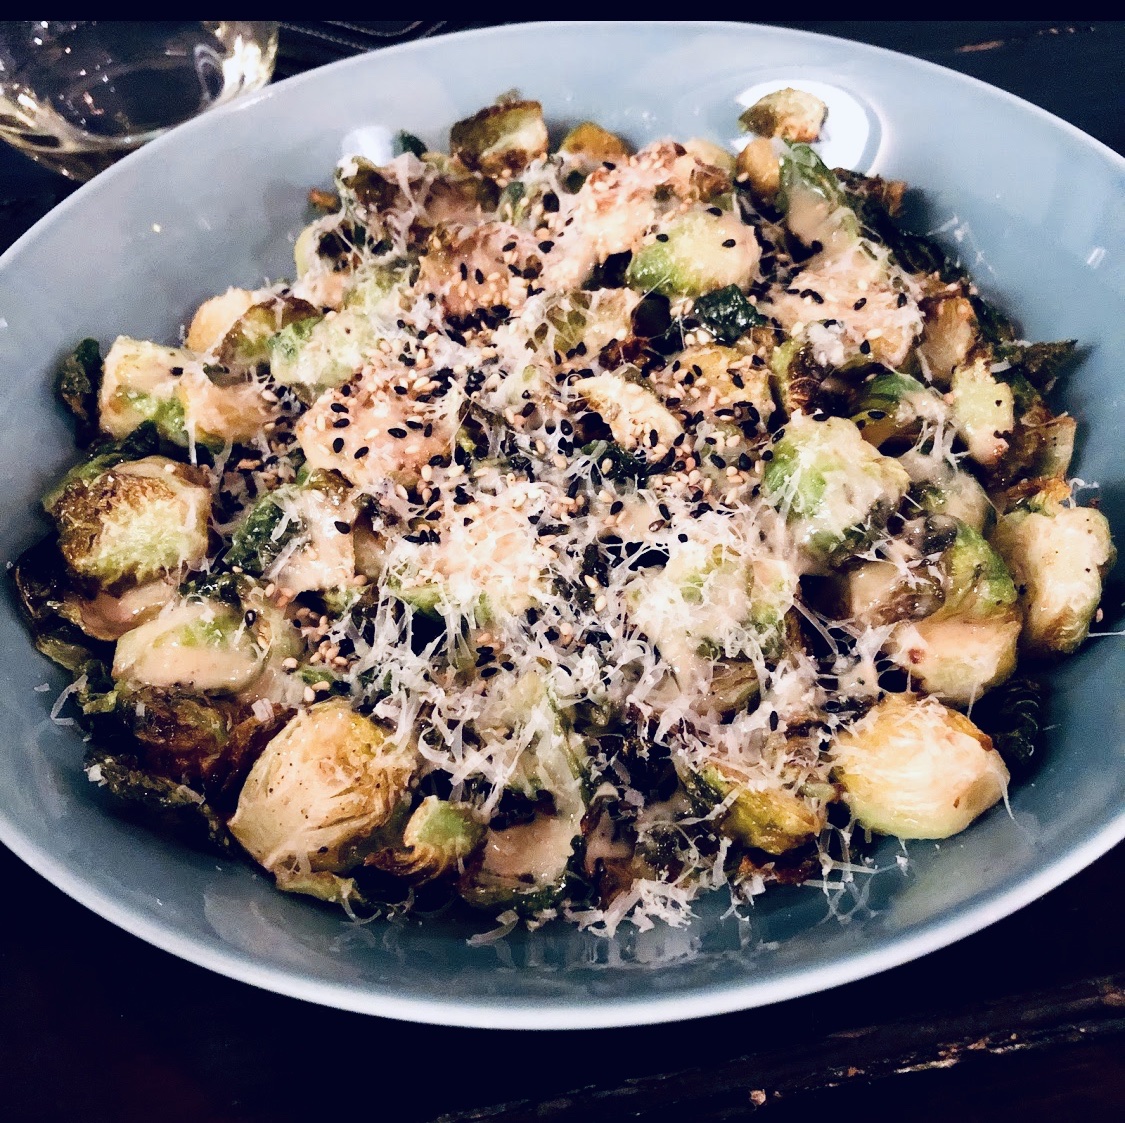 Brussel Sprouts - must order!